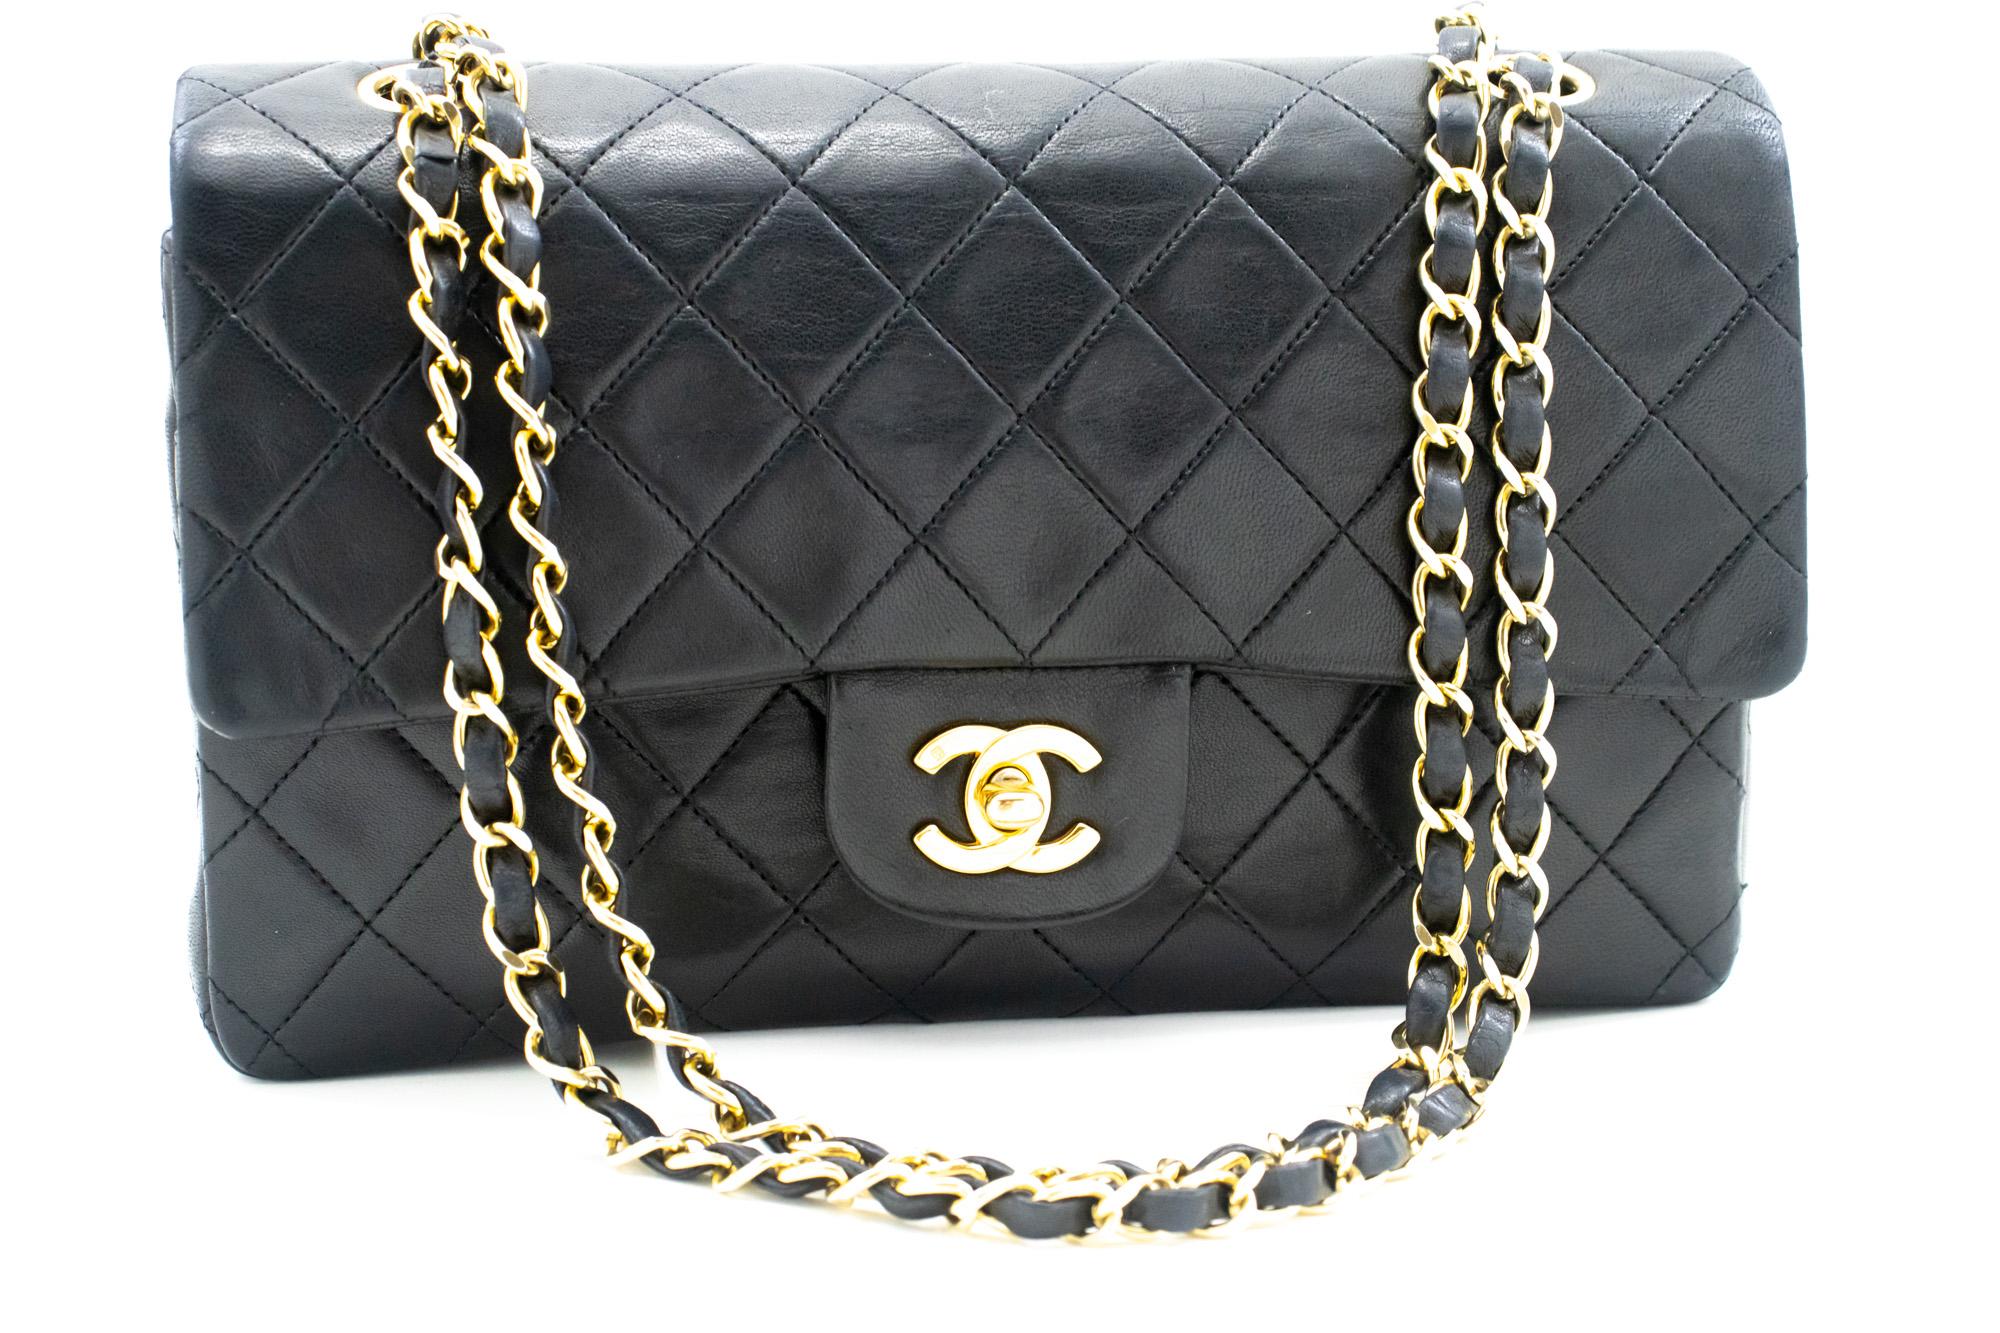 An authentic CHANEL Classic Double Flap Medium Chain Shoulder Bag Black Lamb. The color is Black. The outside material is Leather. The pattern is Solid. This item is Vintage / Classic. The year of manufacture would be 1989-1991.
Conditions &